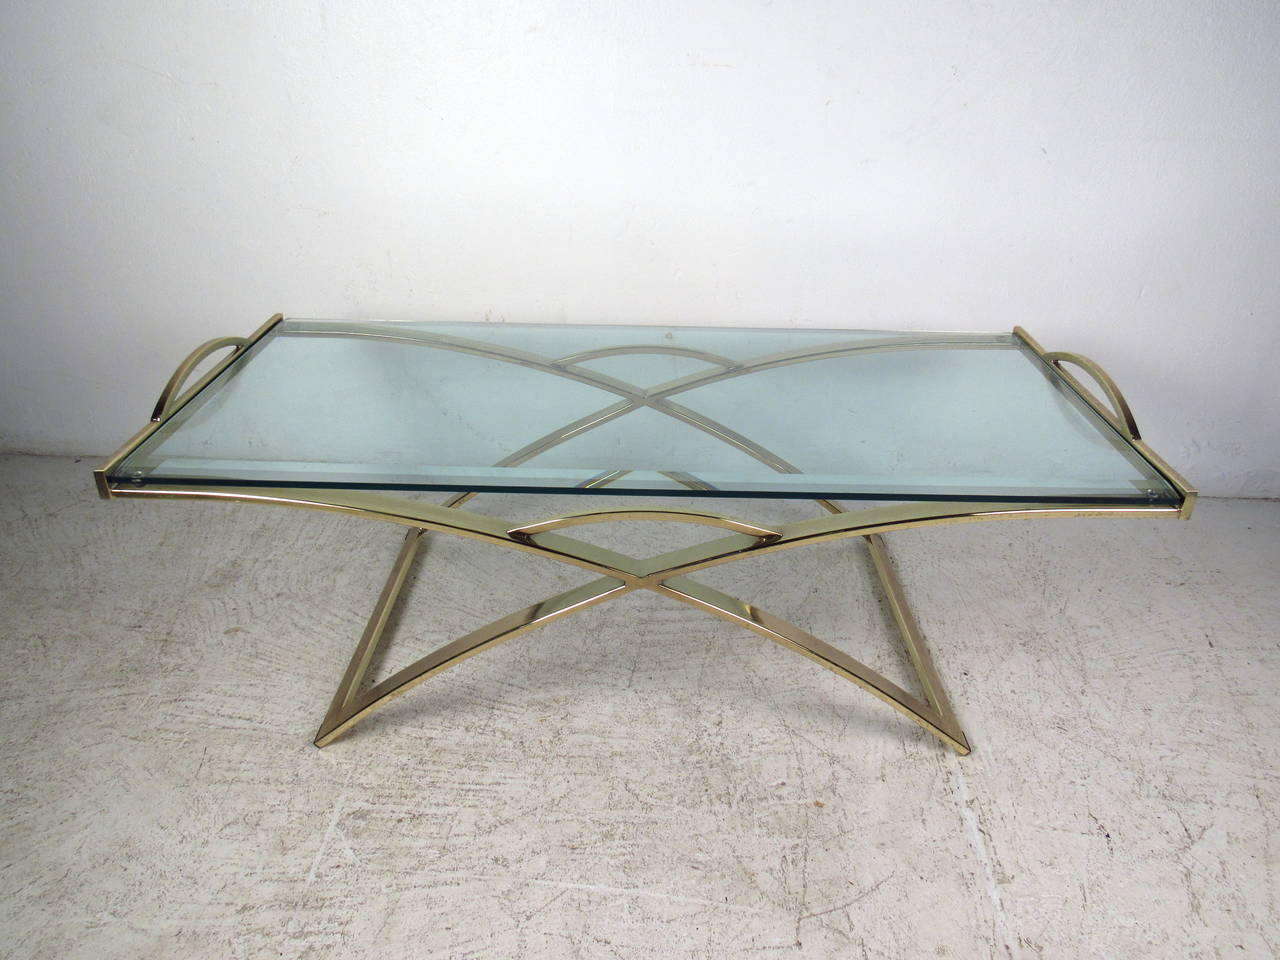 American Mid-Century Modern Brass-Plated Coffee Table with Bevelled Glass Top